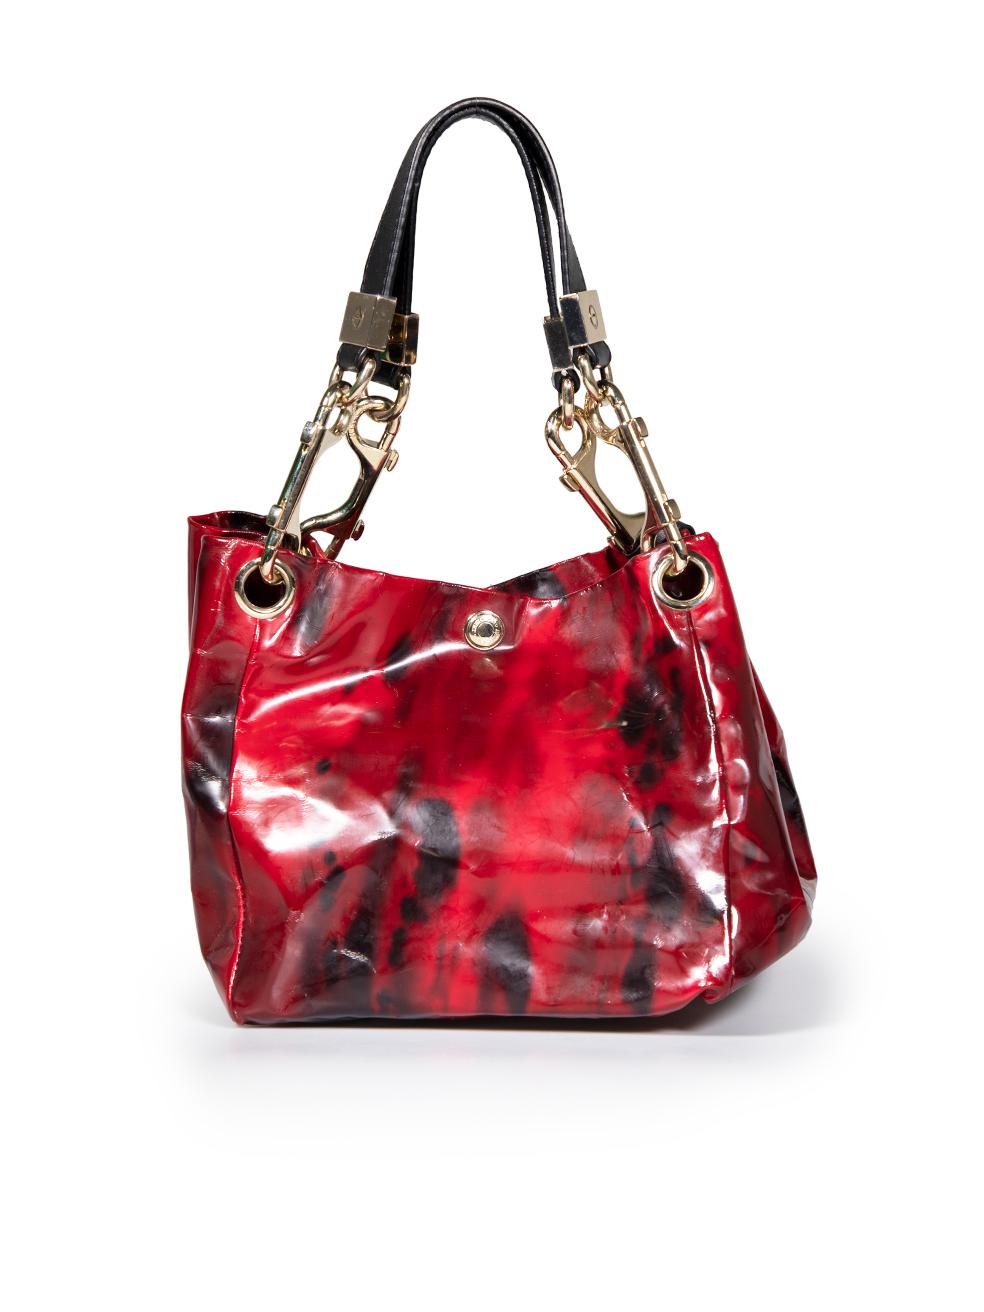 Jimmy Choo Red Patent Leather Printed Lola Bag In Good Condition For Sale In London, GB